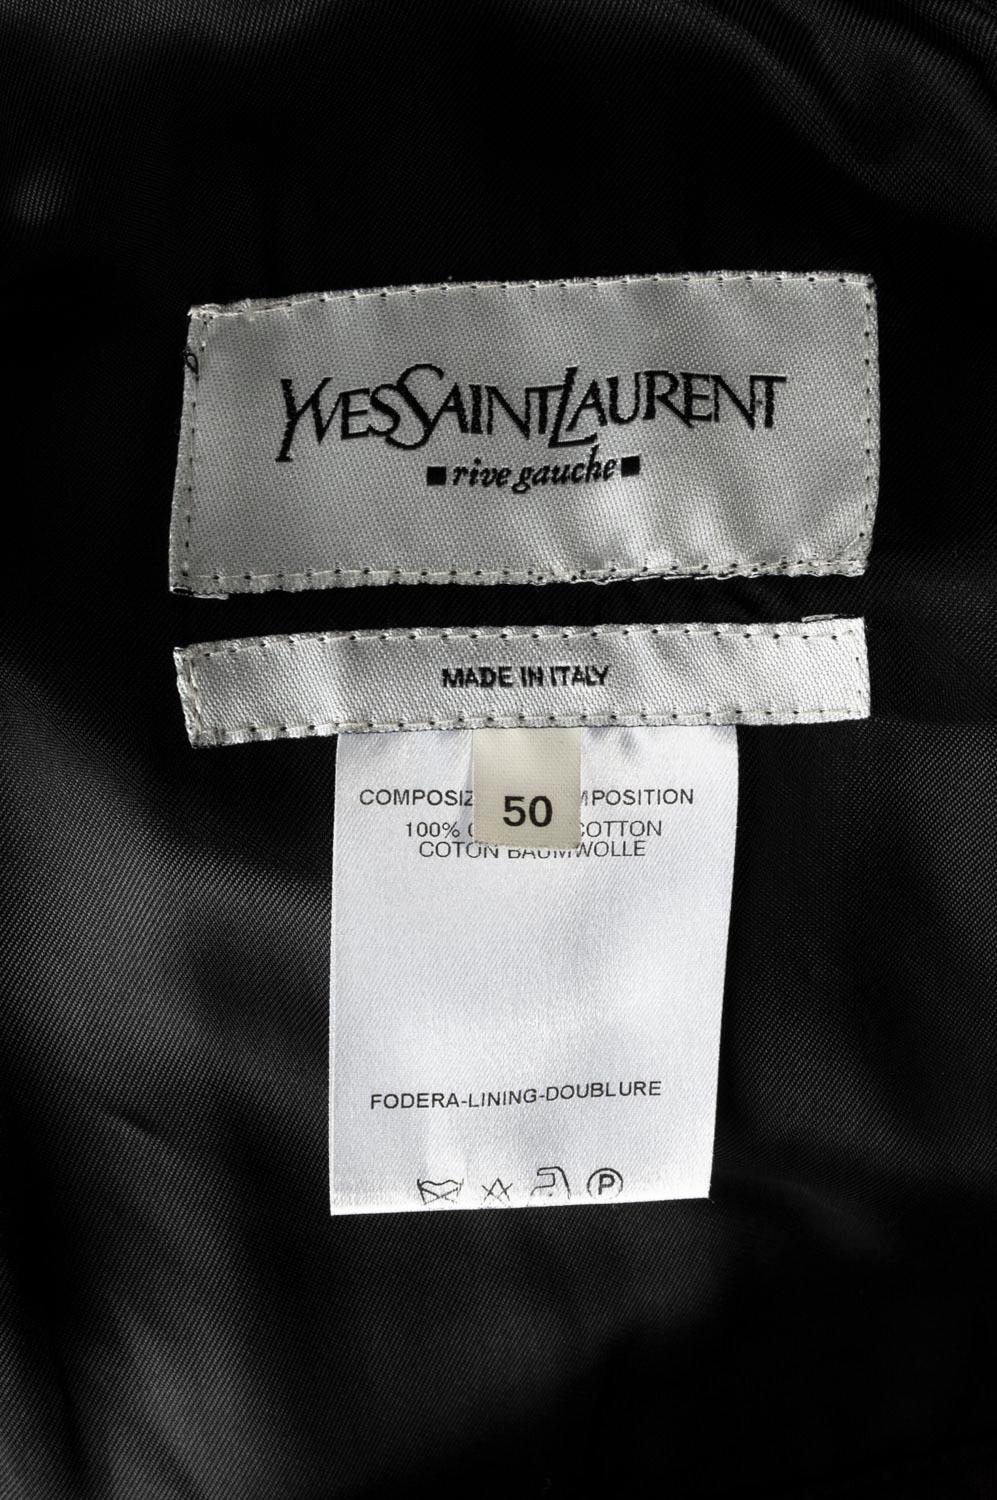 Yves Saint Laurent Men Coat by Tom Ford Rive Gauche Size 50 (Large), S550 For Sale 3